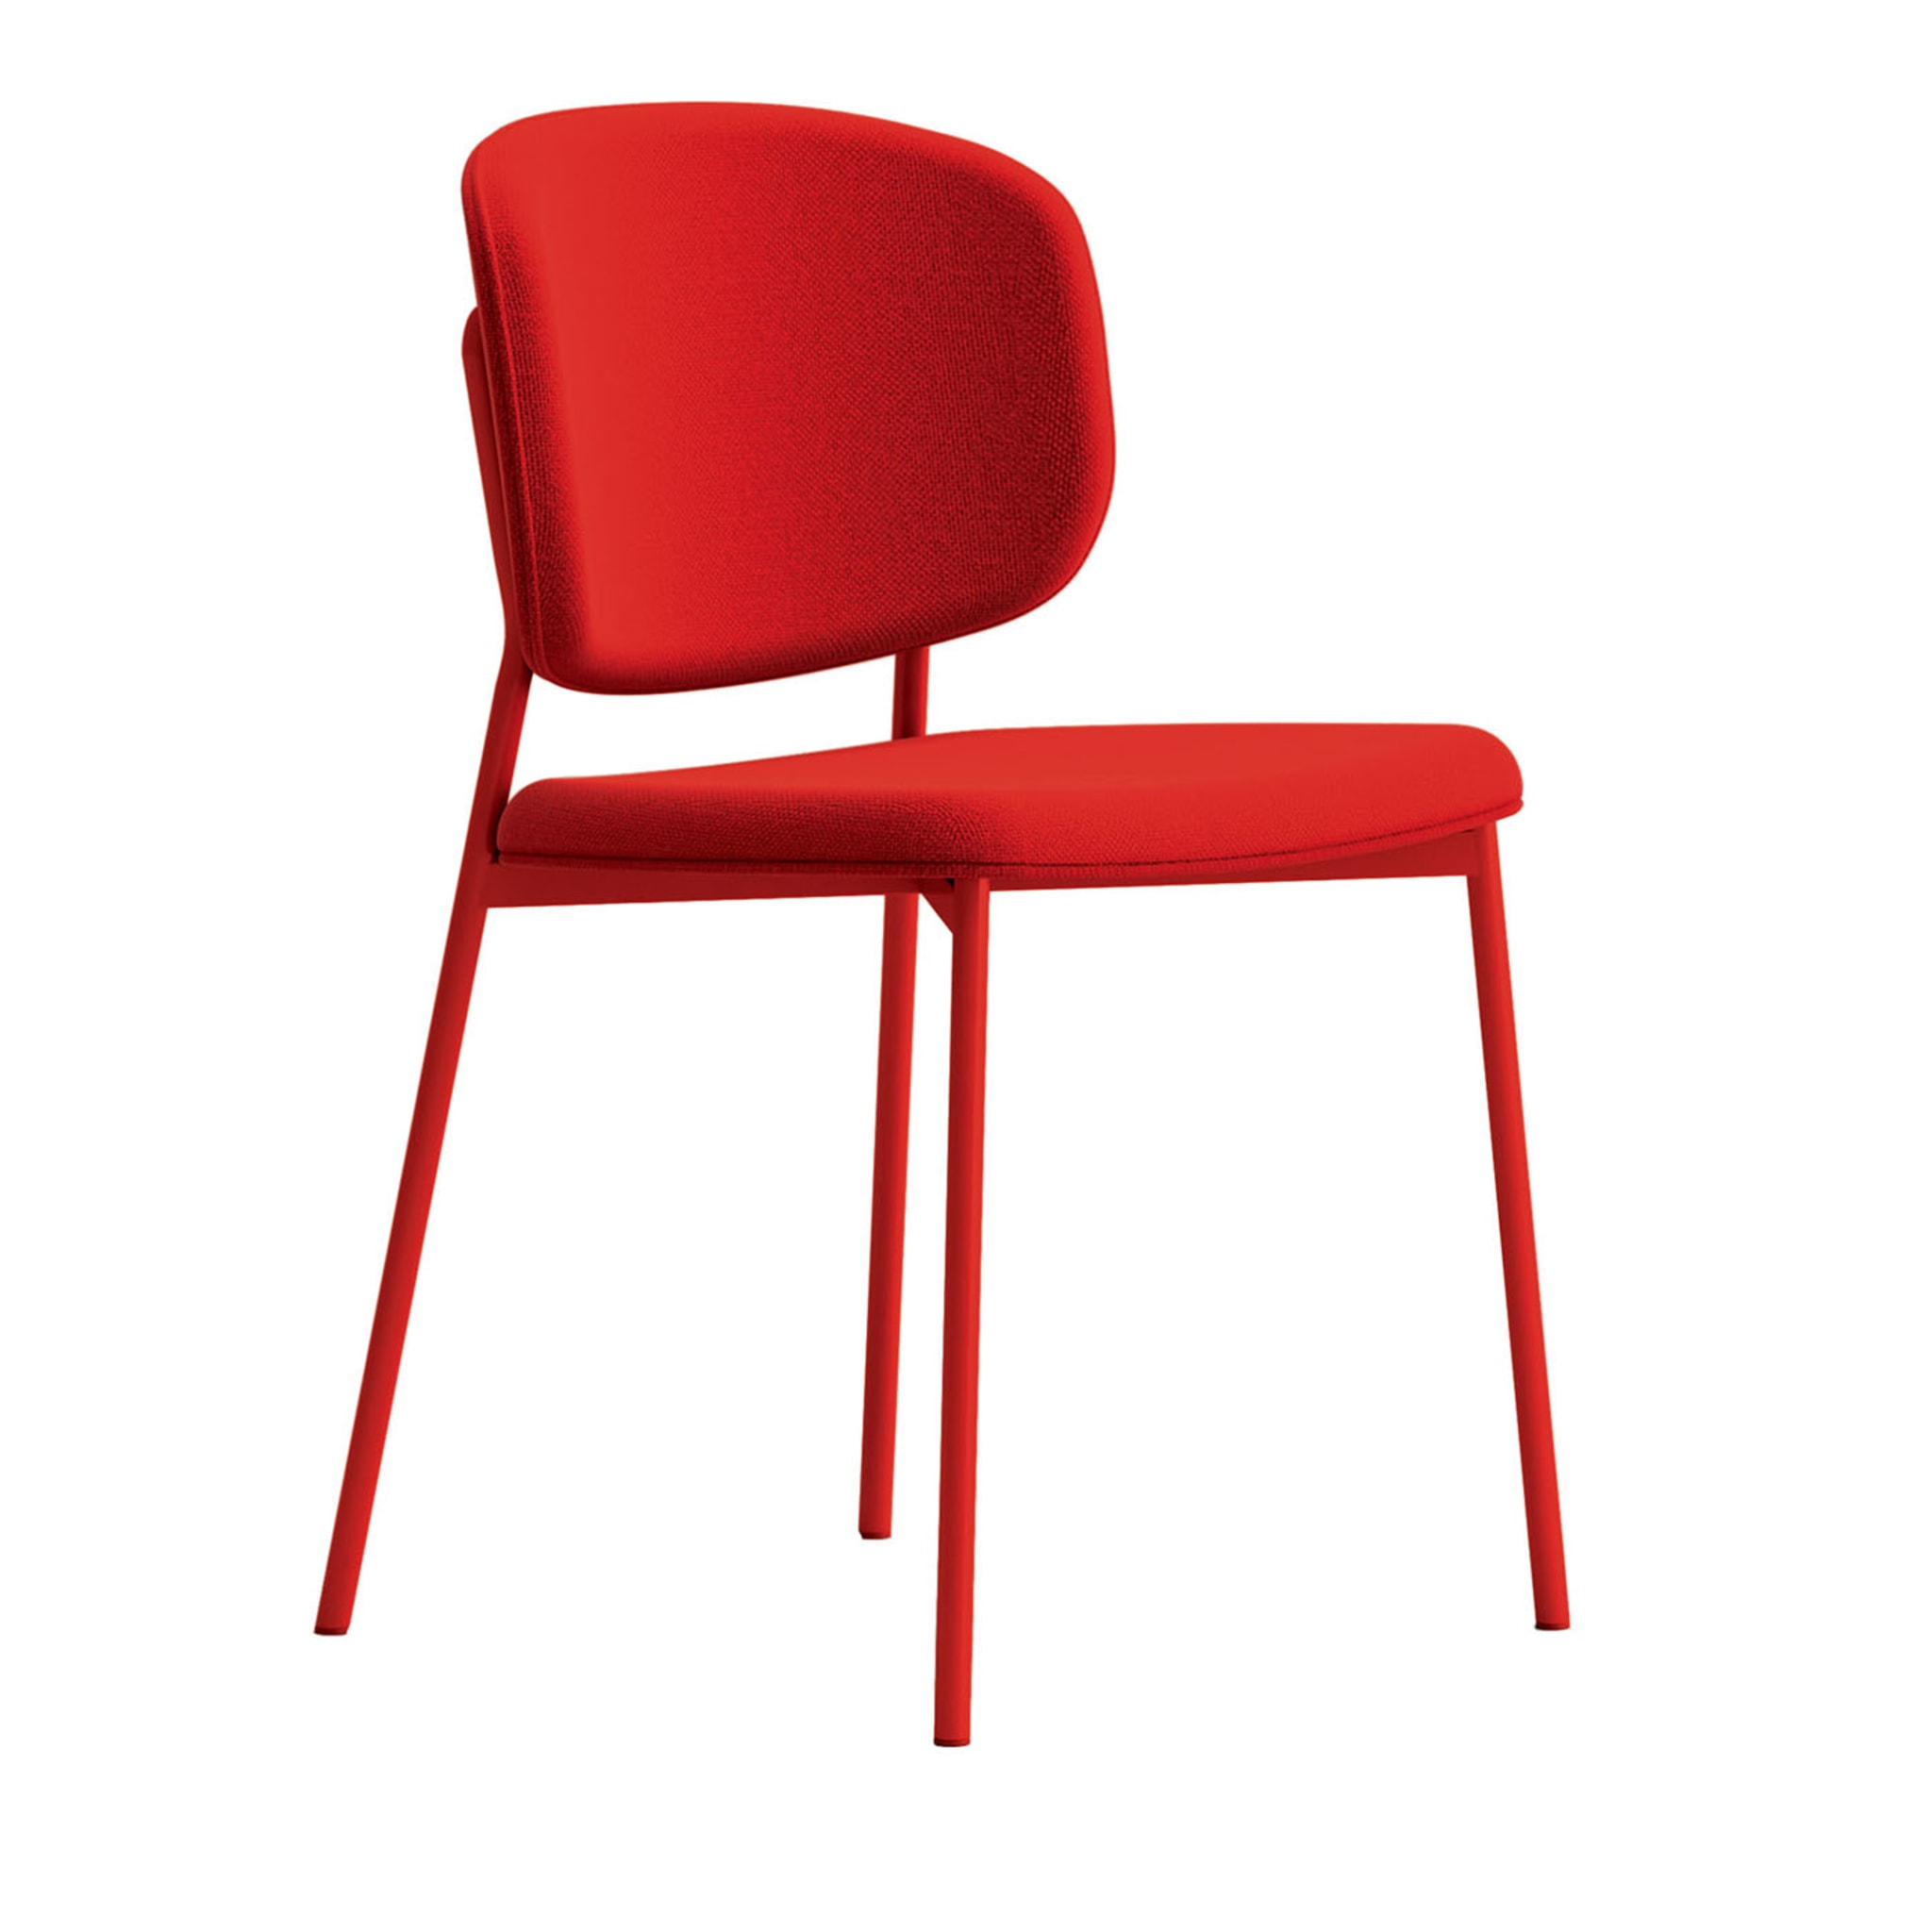 Wround Red Chair by Copiosa Lab - Main view